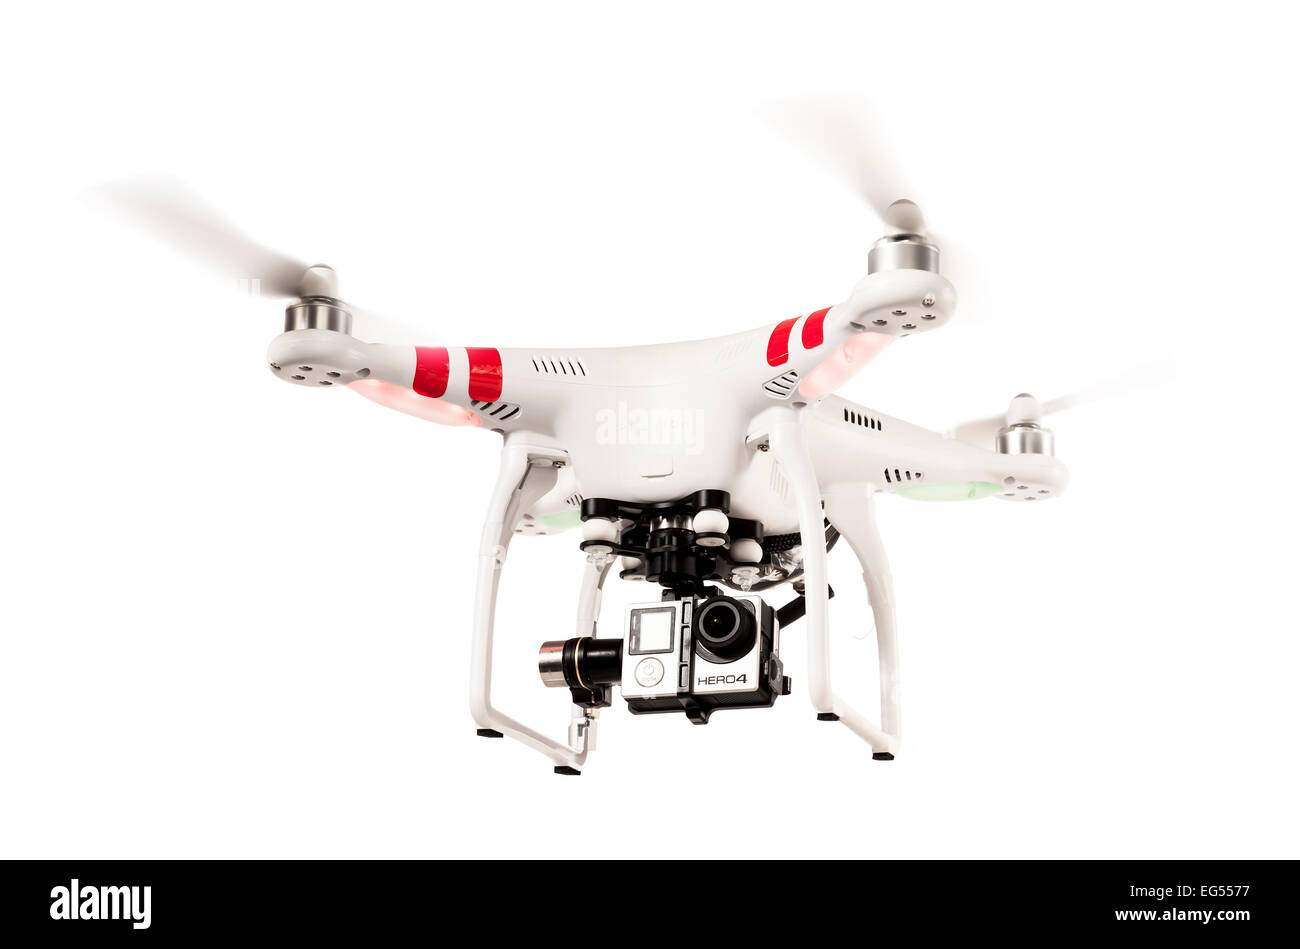 A DJI phantom quadcopter or drone flying on a white background Stock Photo  - Alamy